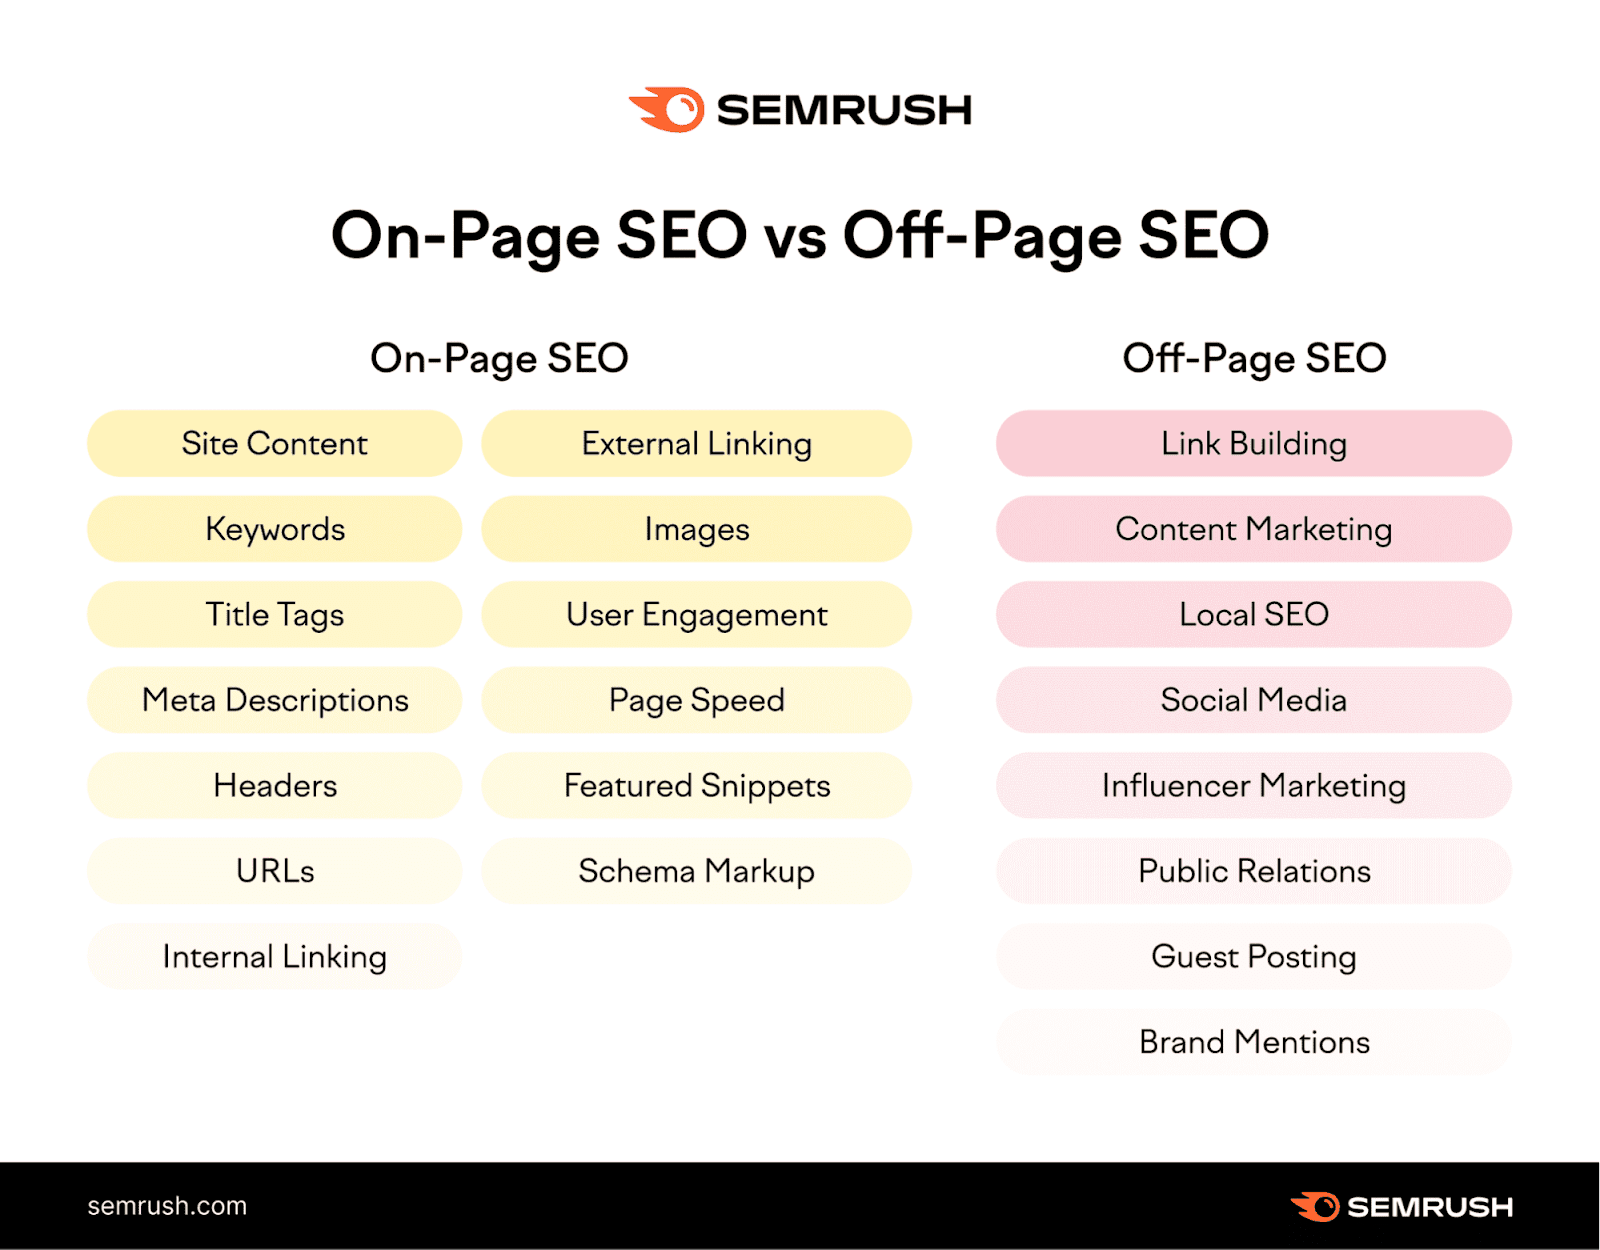 On-page SEO vs off-page SEO